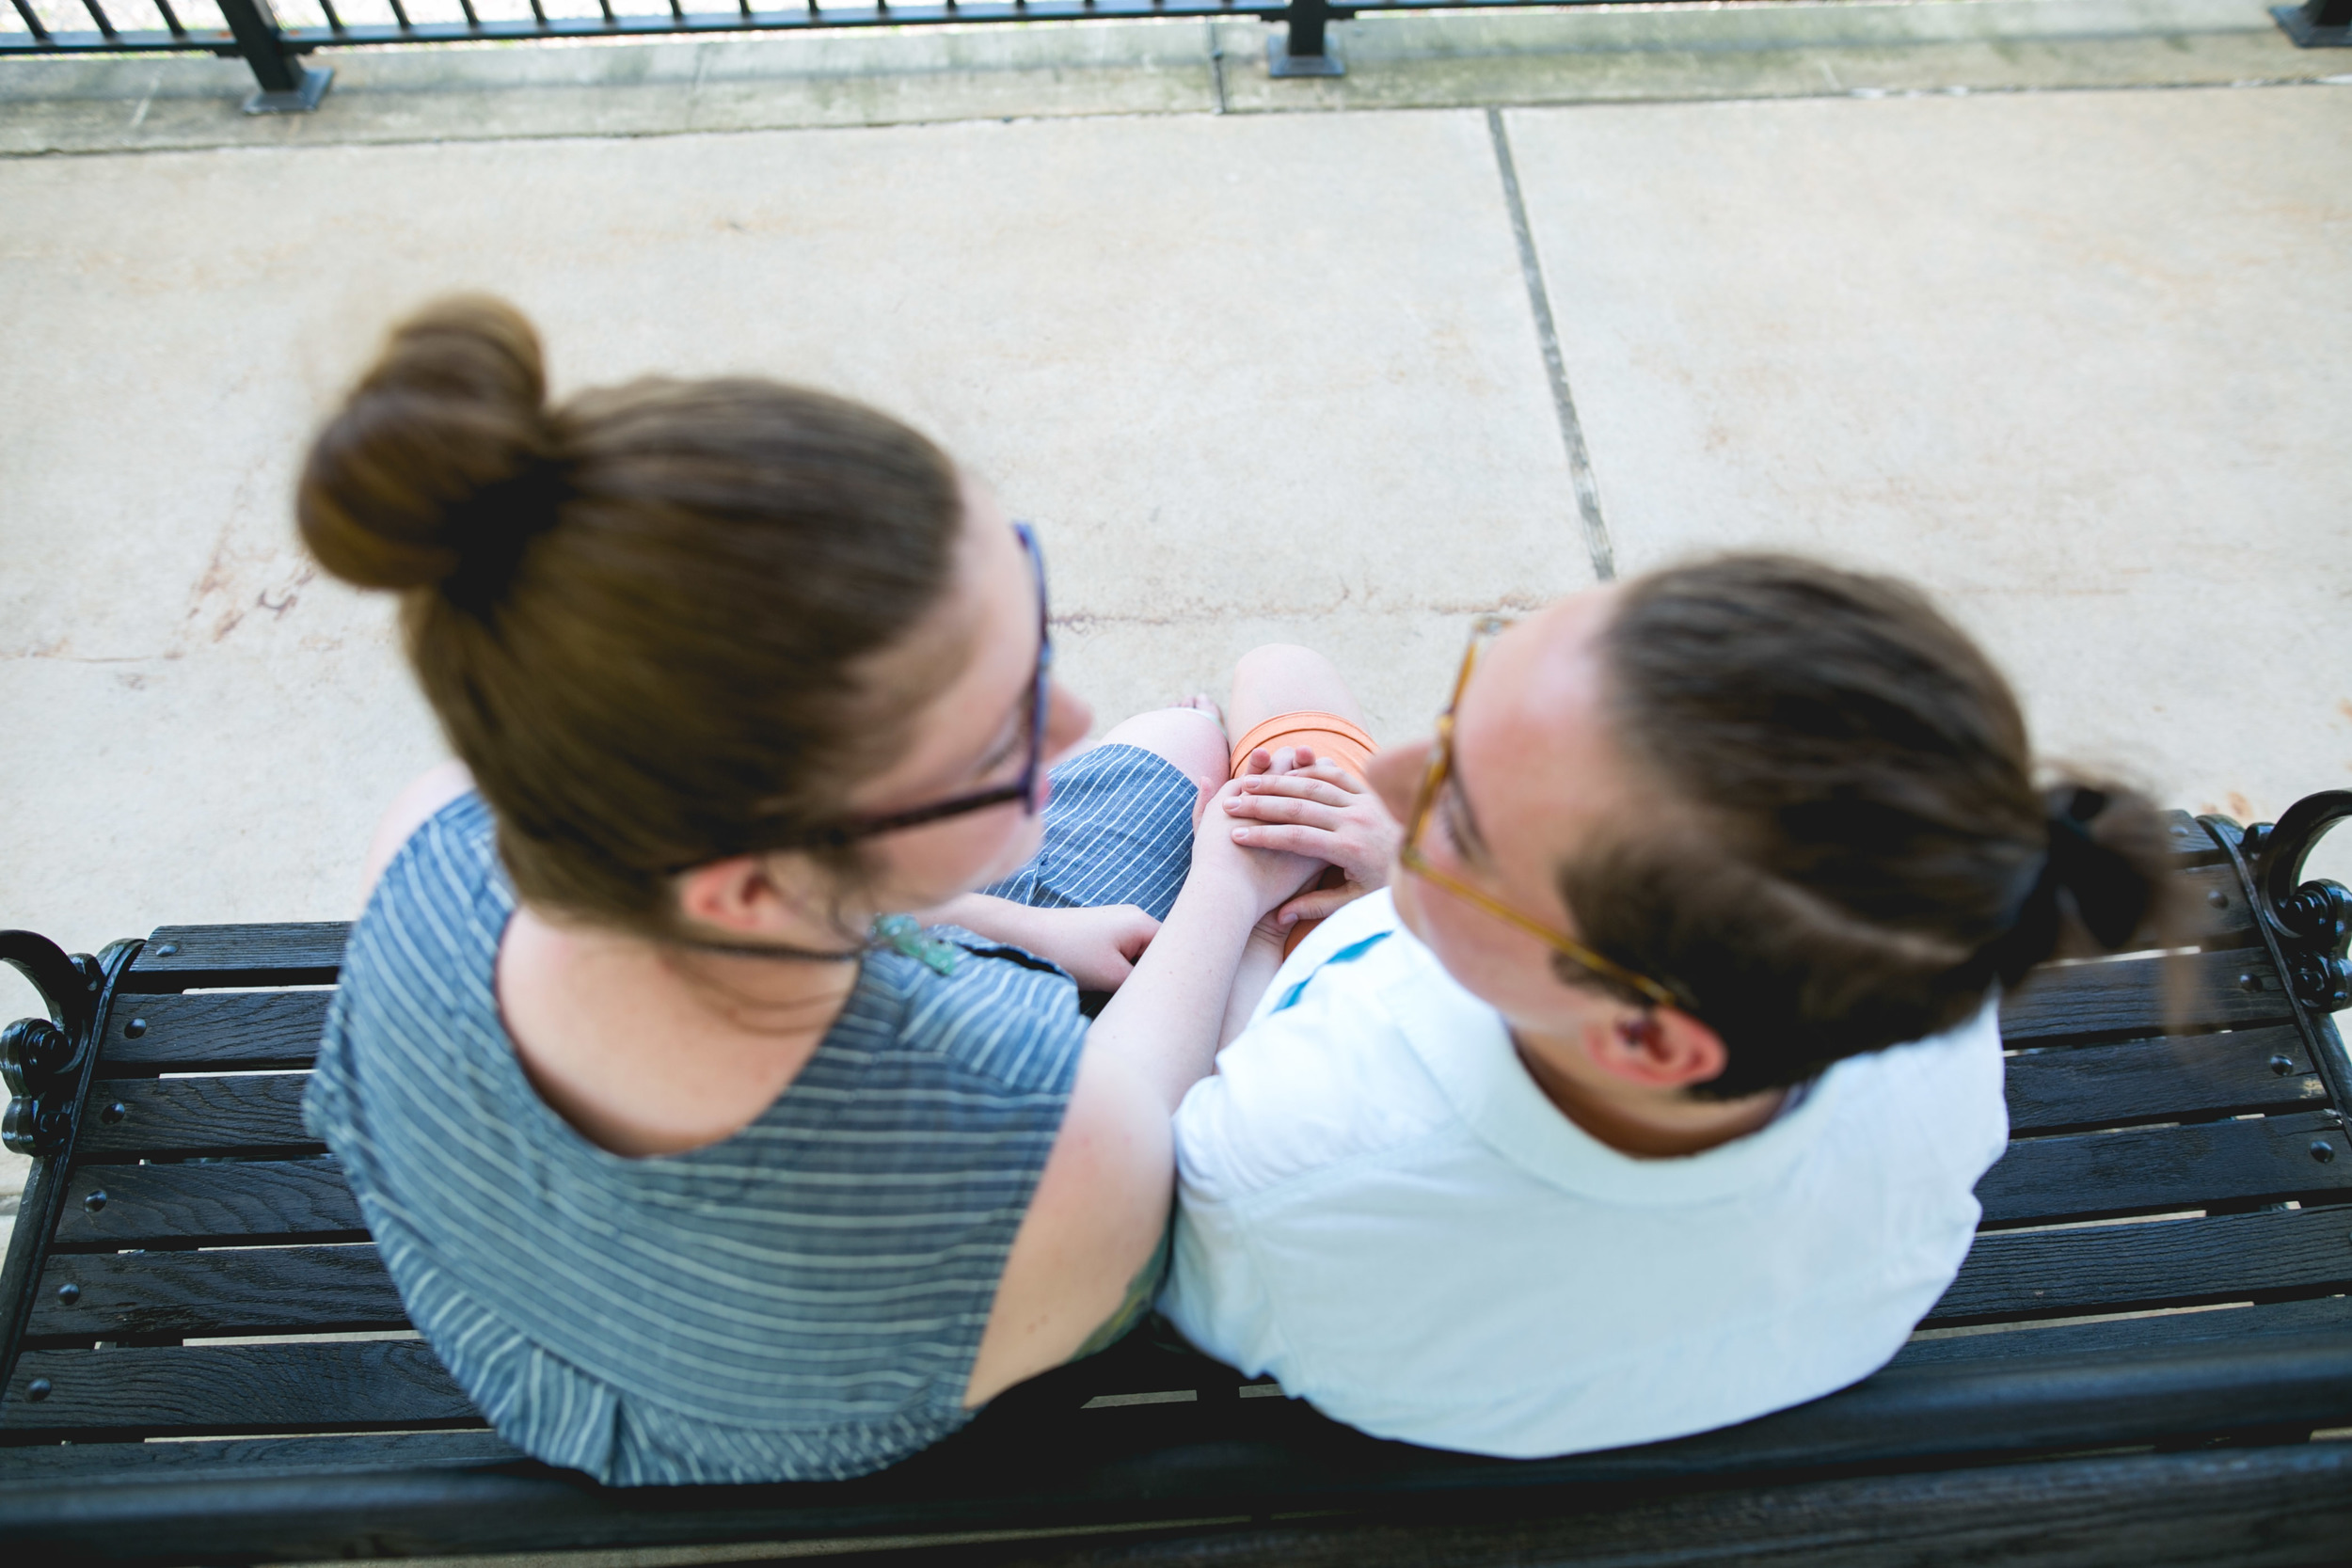  A spring Valley Forge State Park, King of Prussia Pa Queer Engagement session with Alex and Lee by Swiger Photography, Philadelphia's Lesbian Photographer 